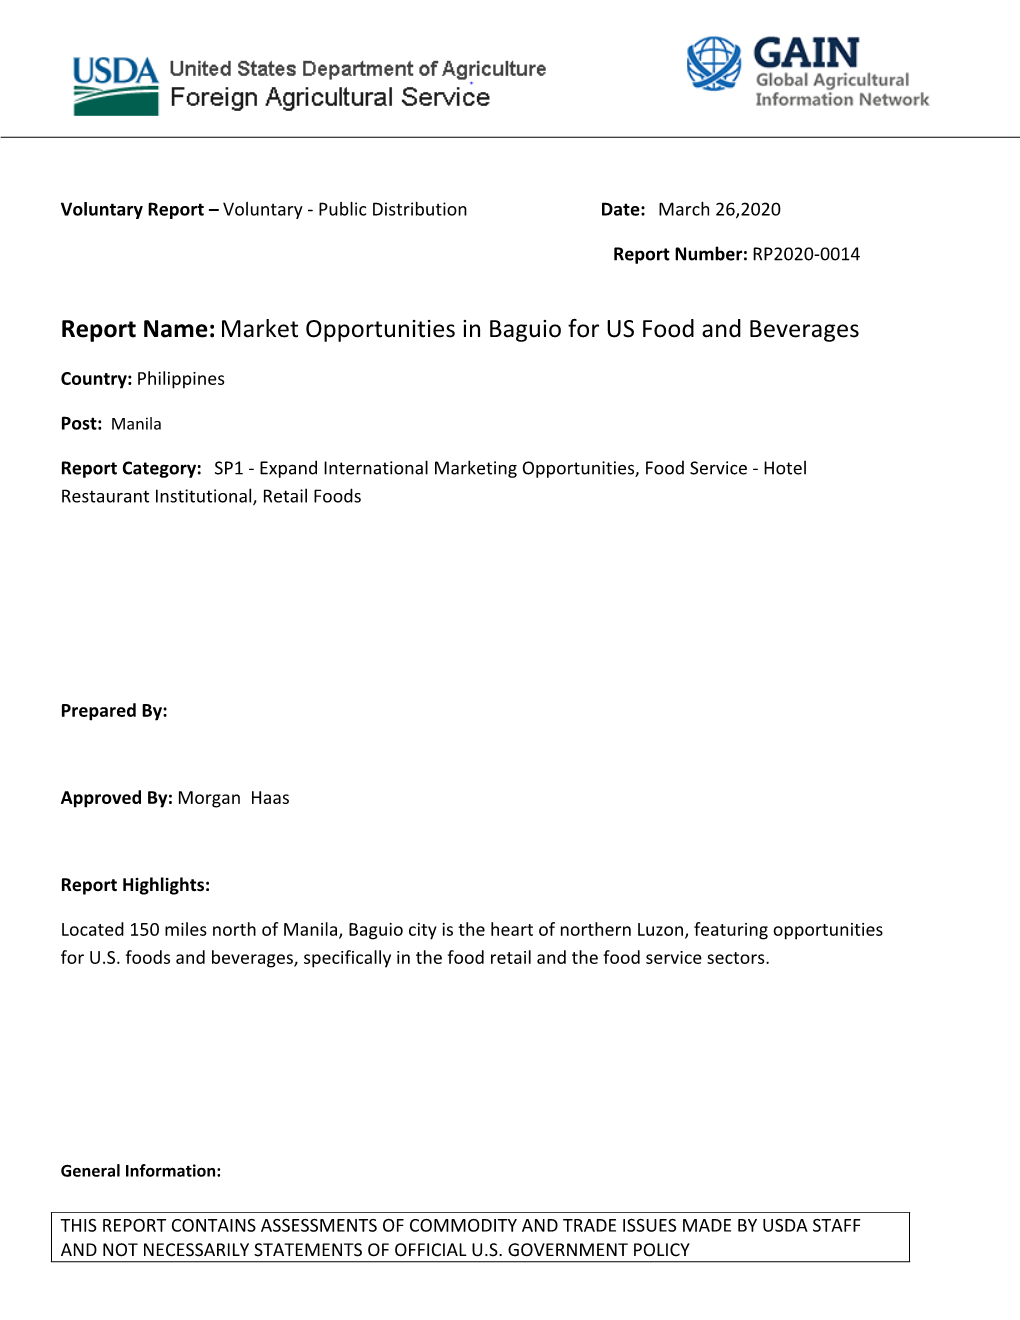 Report Name:Market Opportunities in Baguio for US Food and Beverages